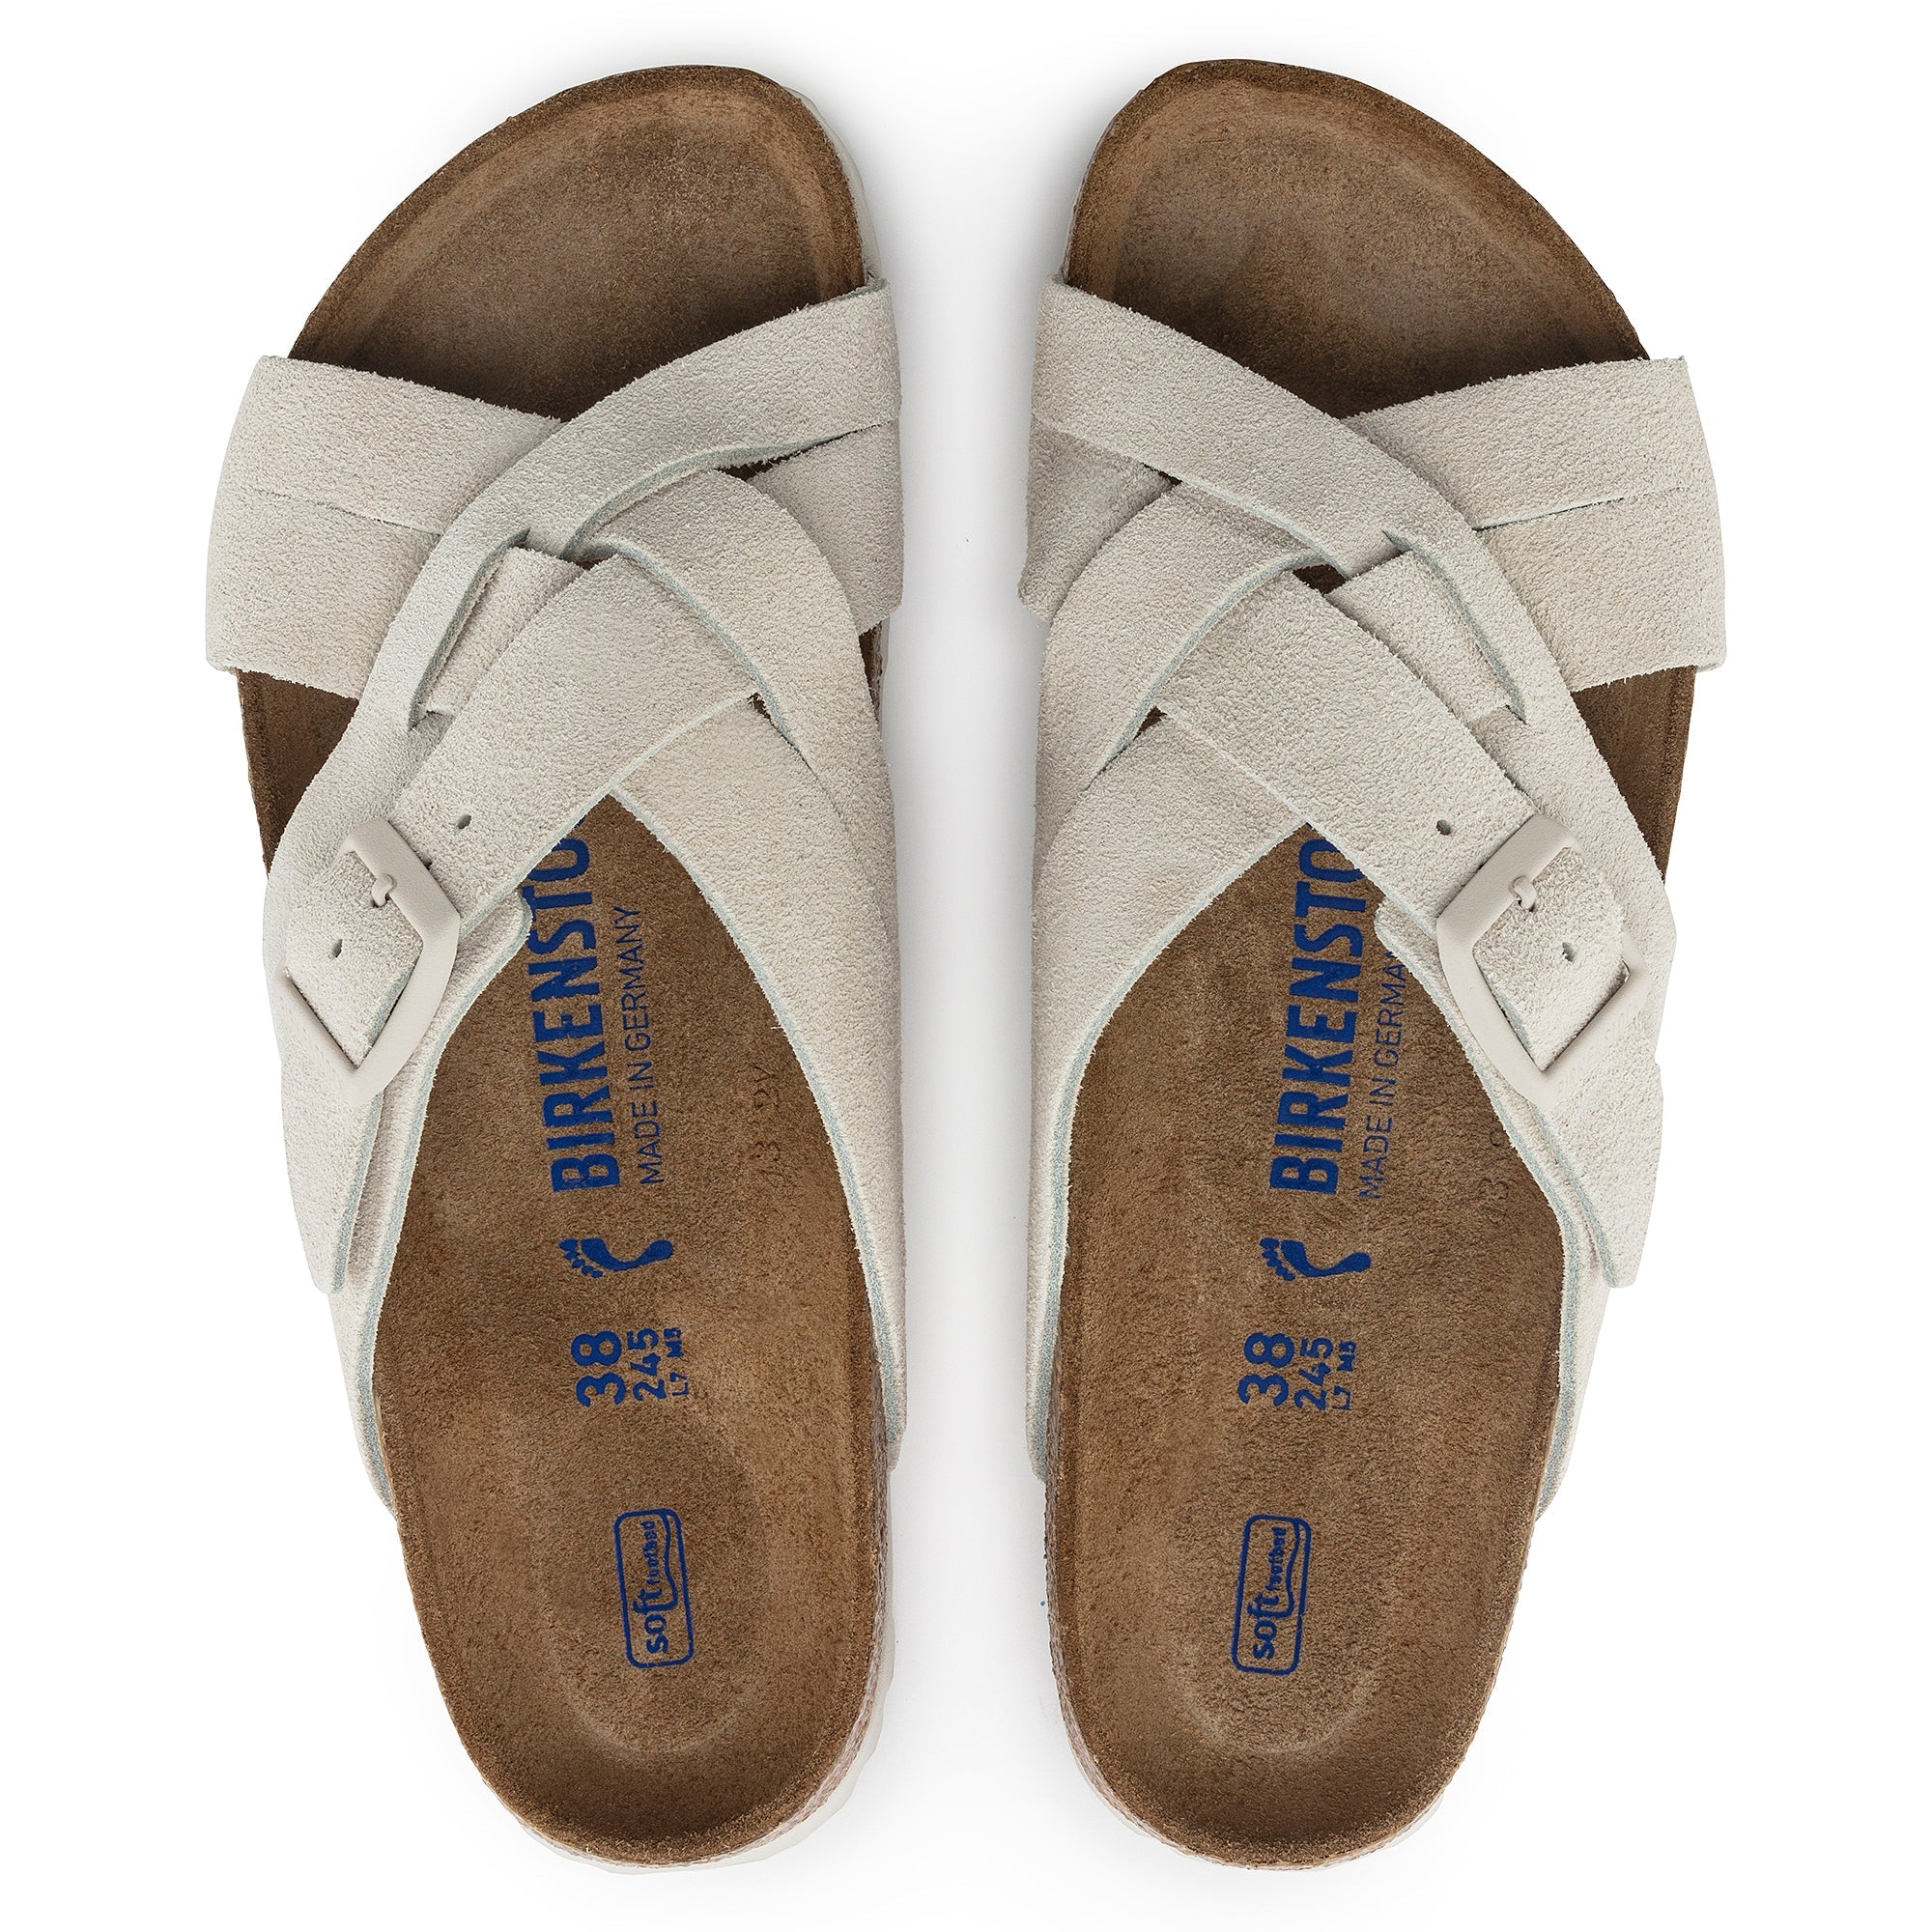 Birkenstock Lugano Soft Footbed Suede Leather Women's